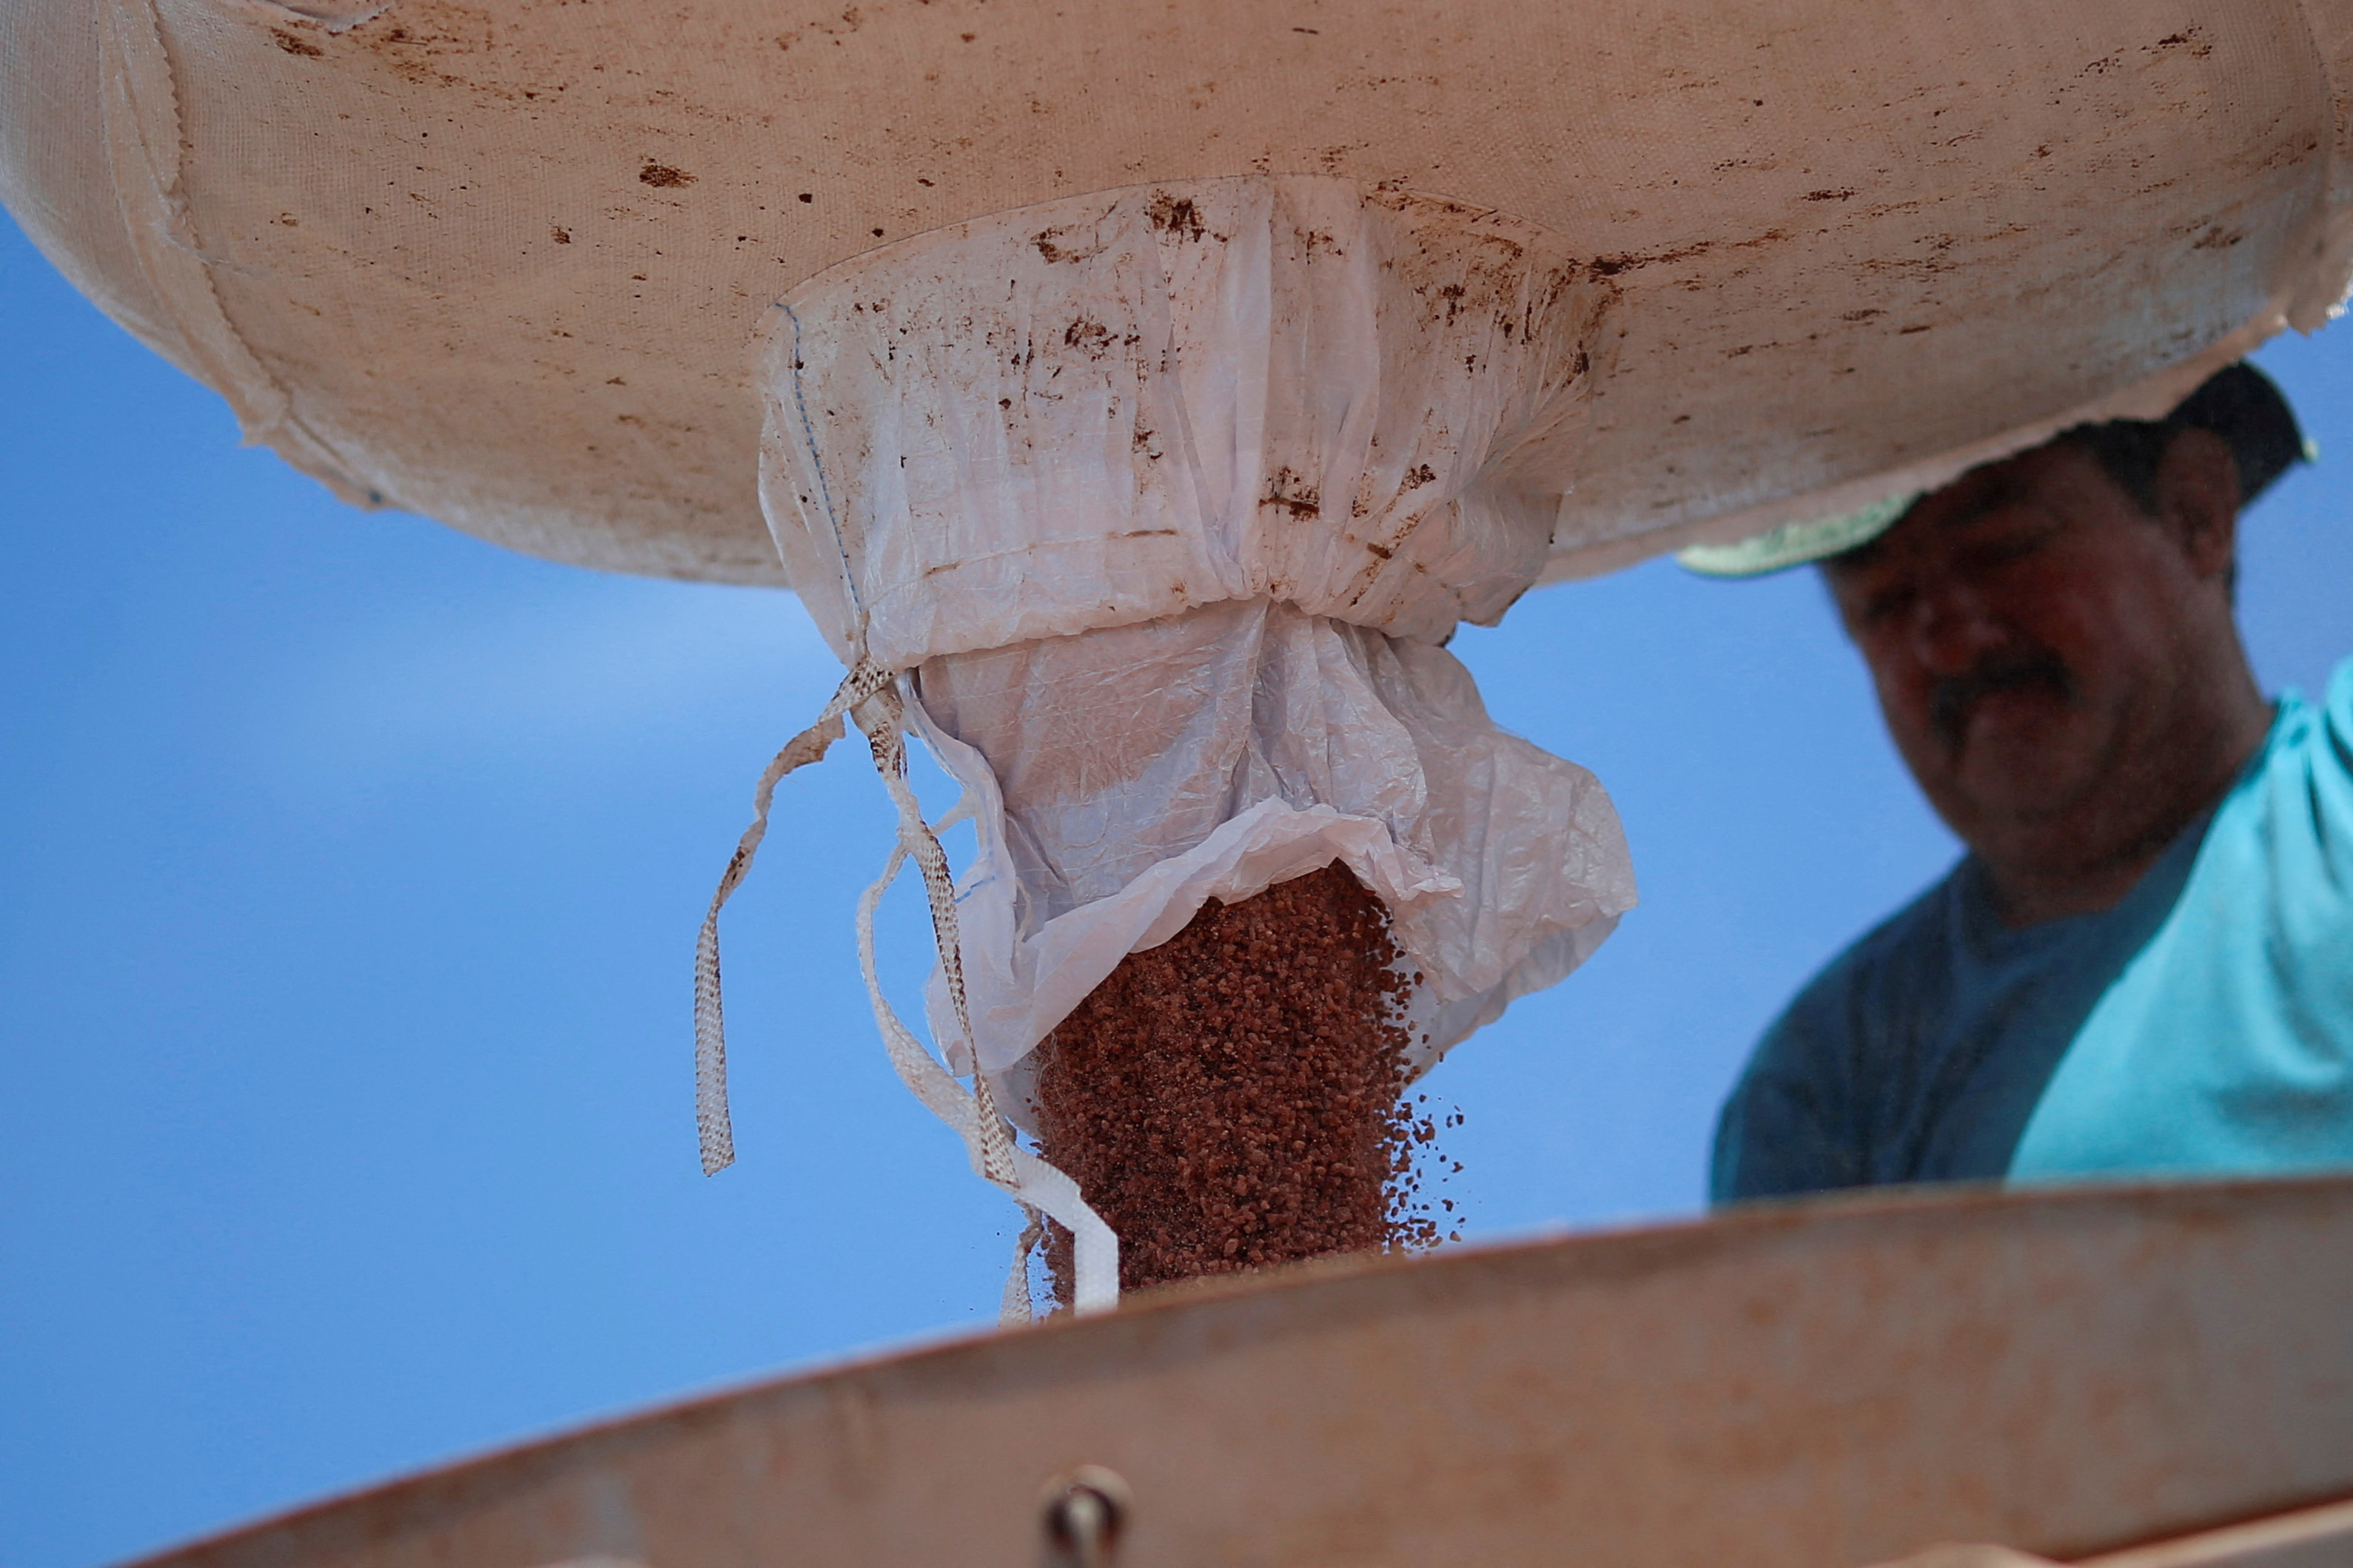 FILE PHOTO: An agricultural worker is seen loading a tractor with fertilizer before spreading it in a soybean field, near Brasilia